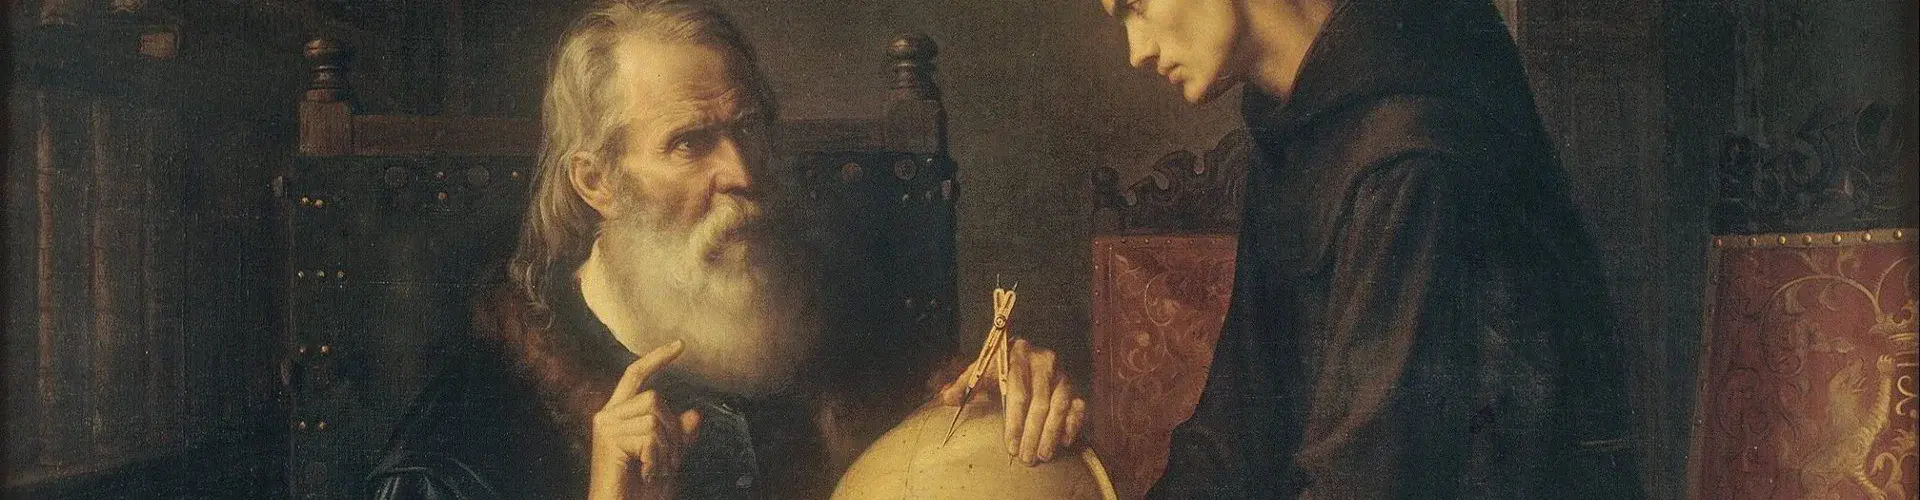 Galileo demonstrating the new astronomical theories at the University of Padua (Credit: painting by Félix Parra, 1873)